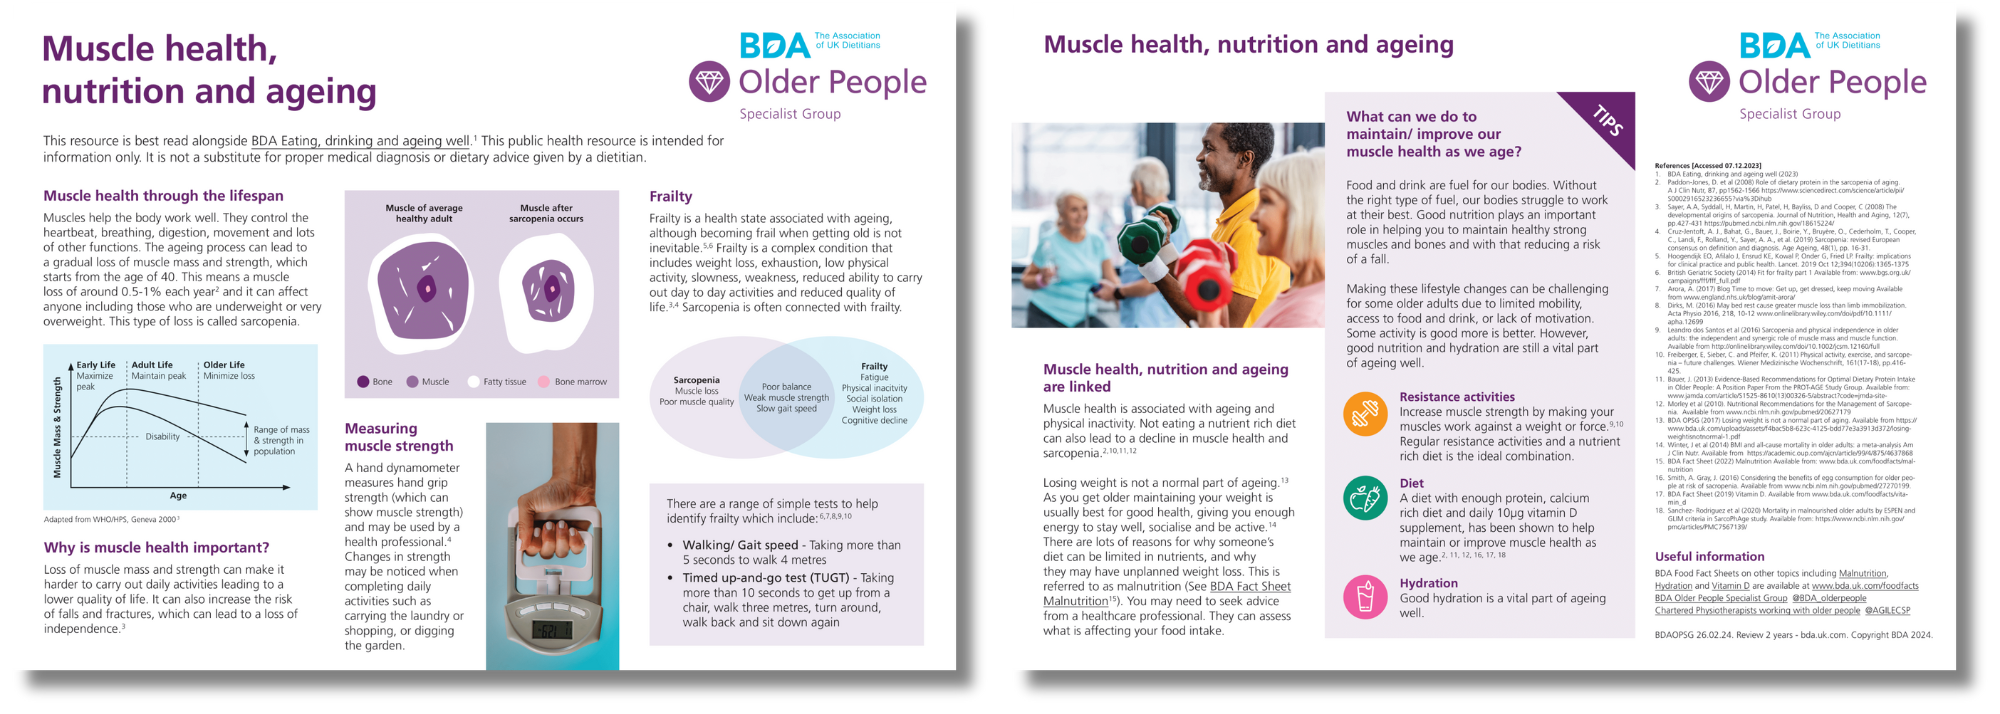 Muscle health, nutrition and ageing thumbnail image